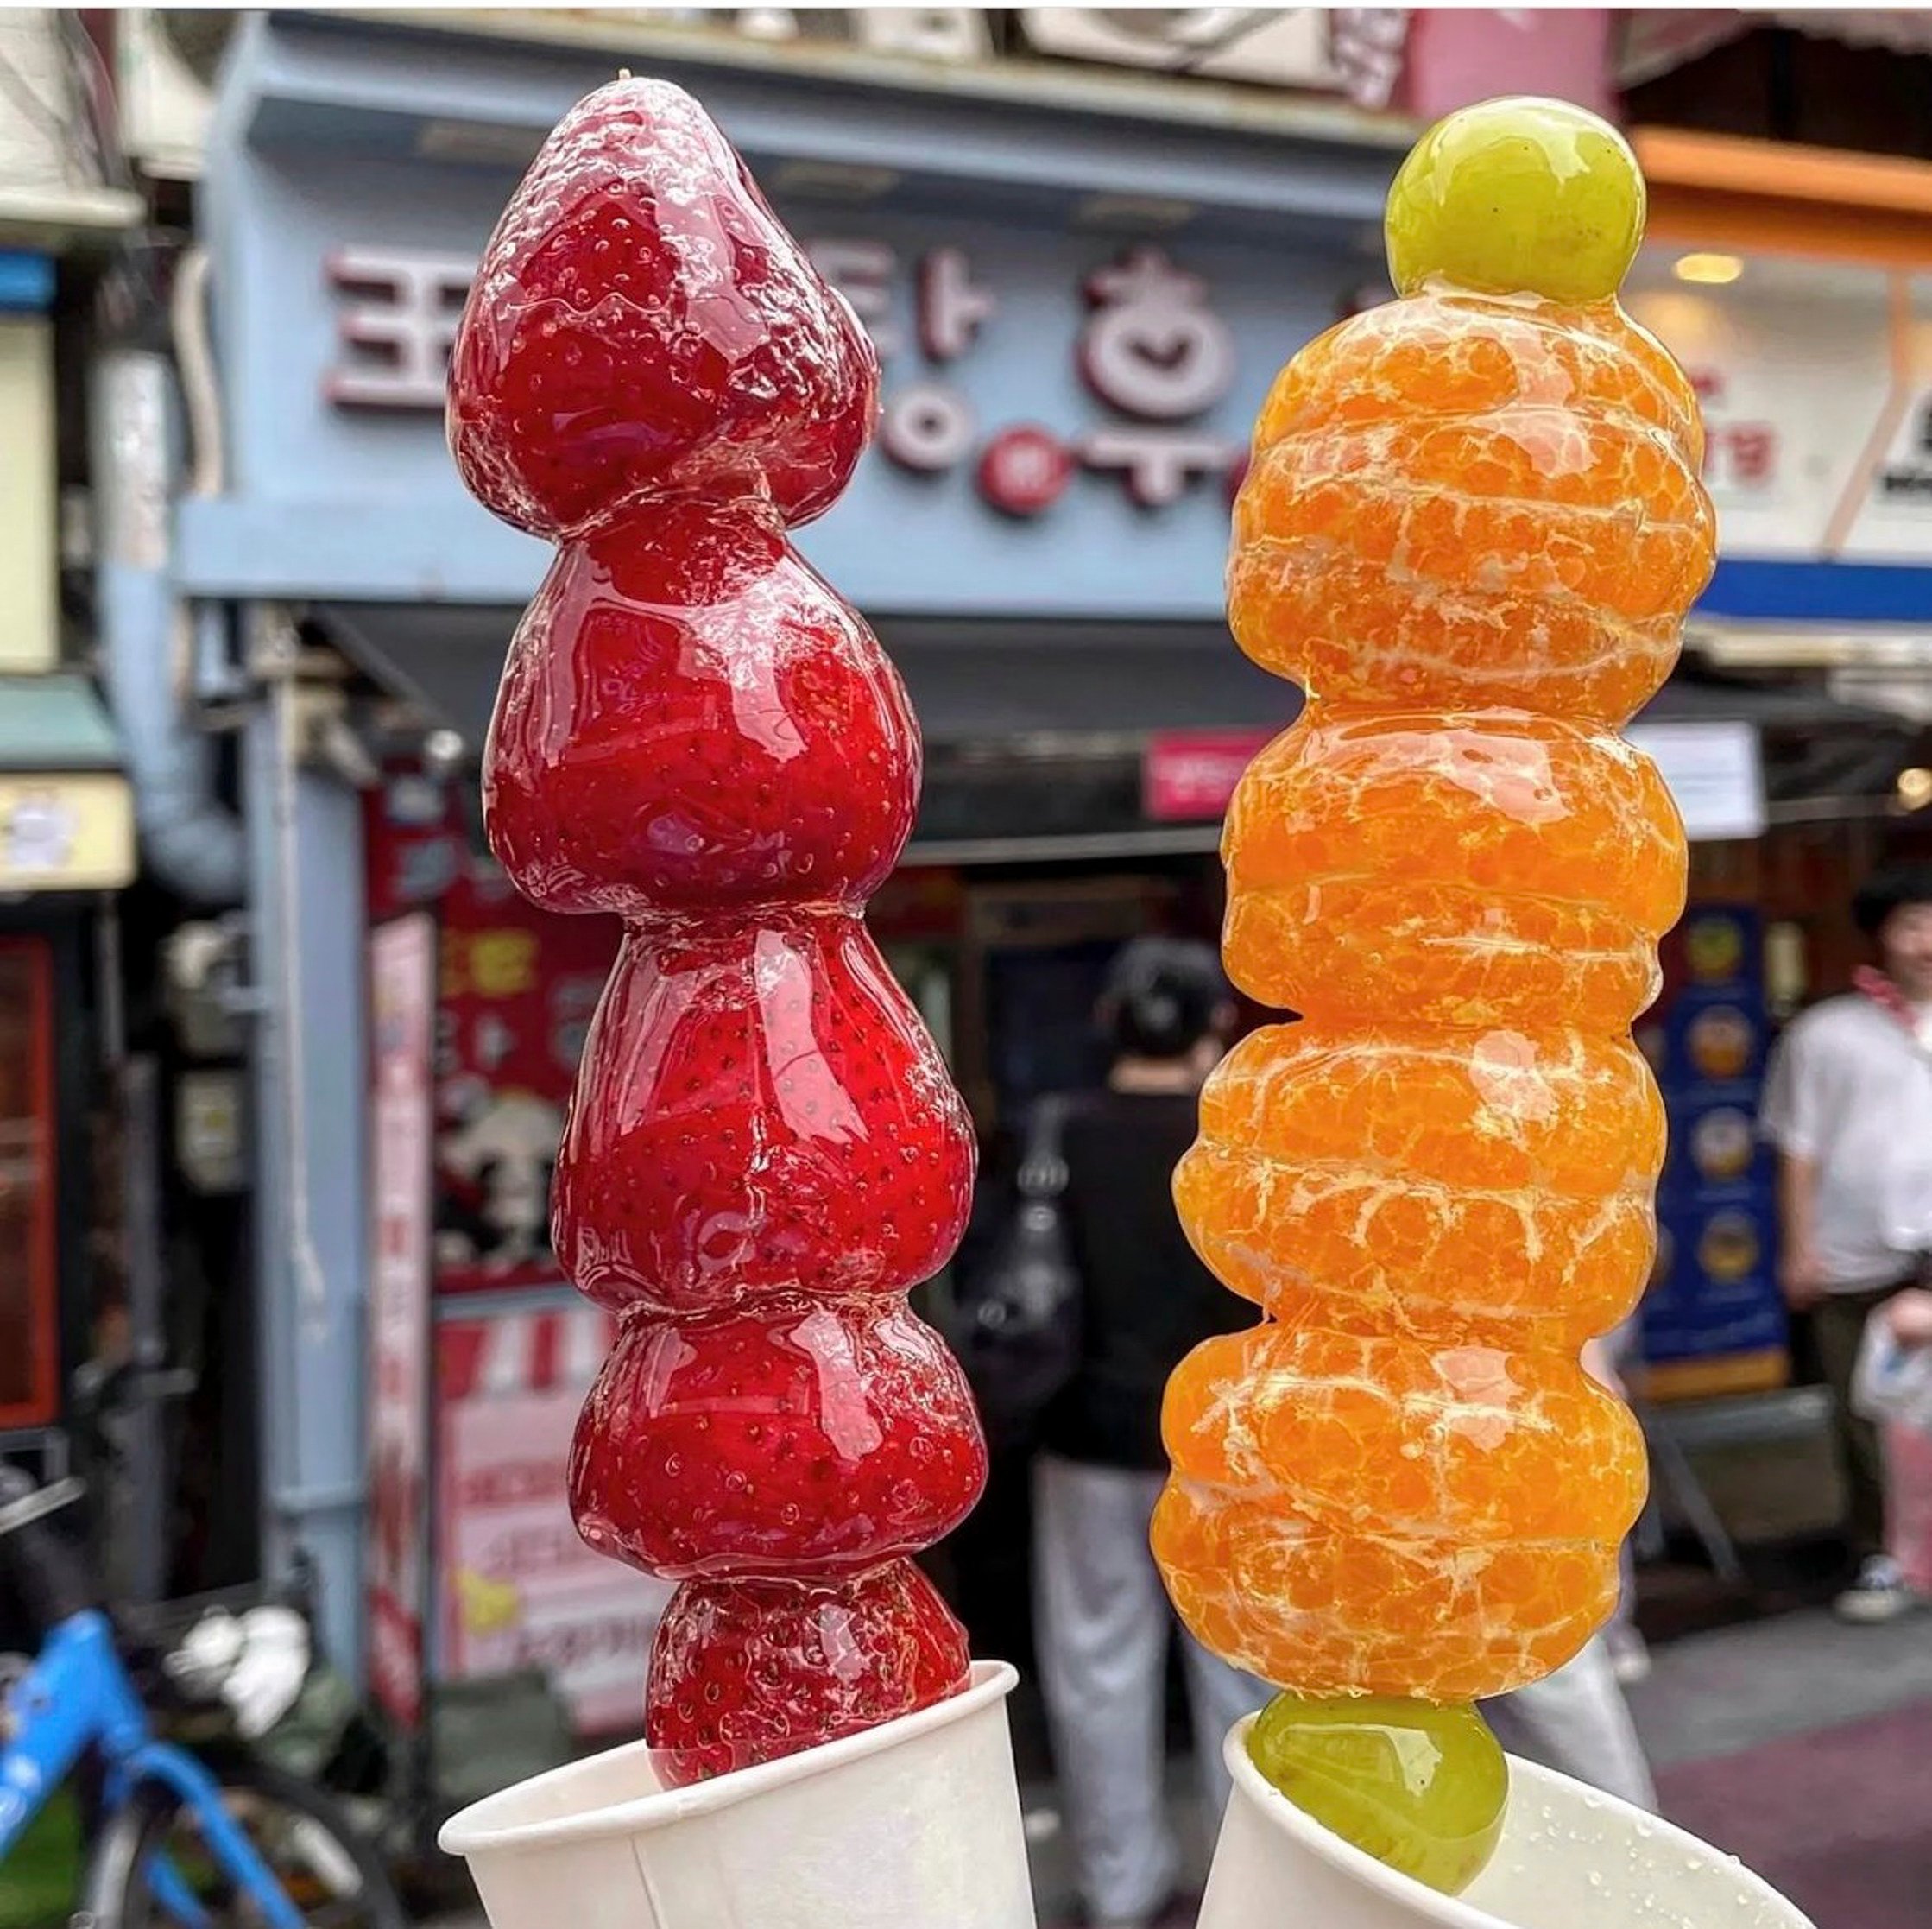 Chinese candied fruit - “tanghulu” - is trending in South Korea. We ask how the centuries-old snack became popular with millennials and members of Gen Z, and whether this food craze is here to stay. Photo: Instagram/@eat_time_food